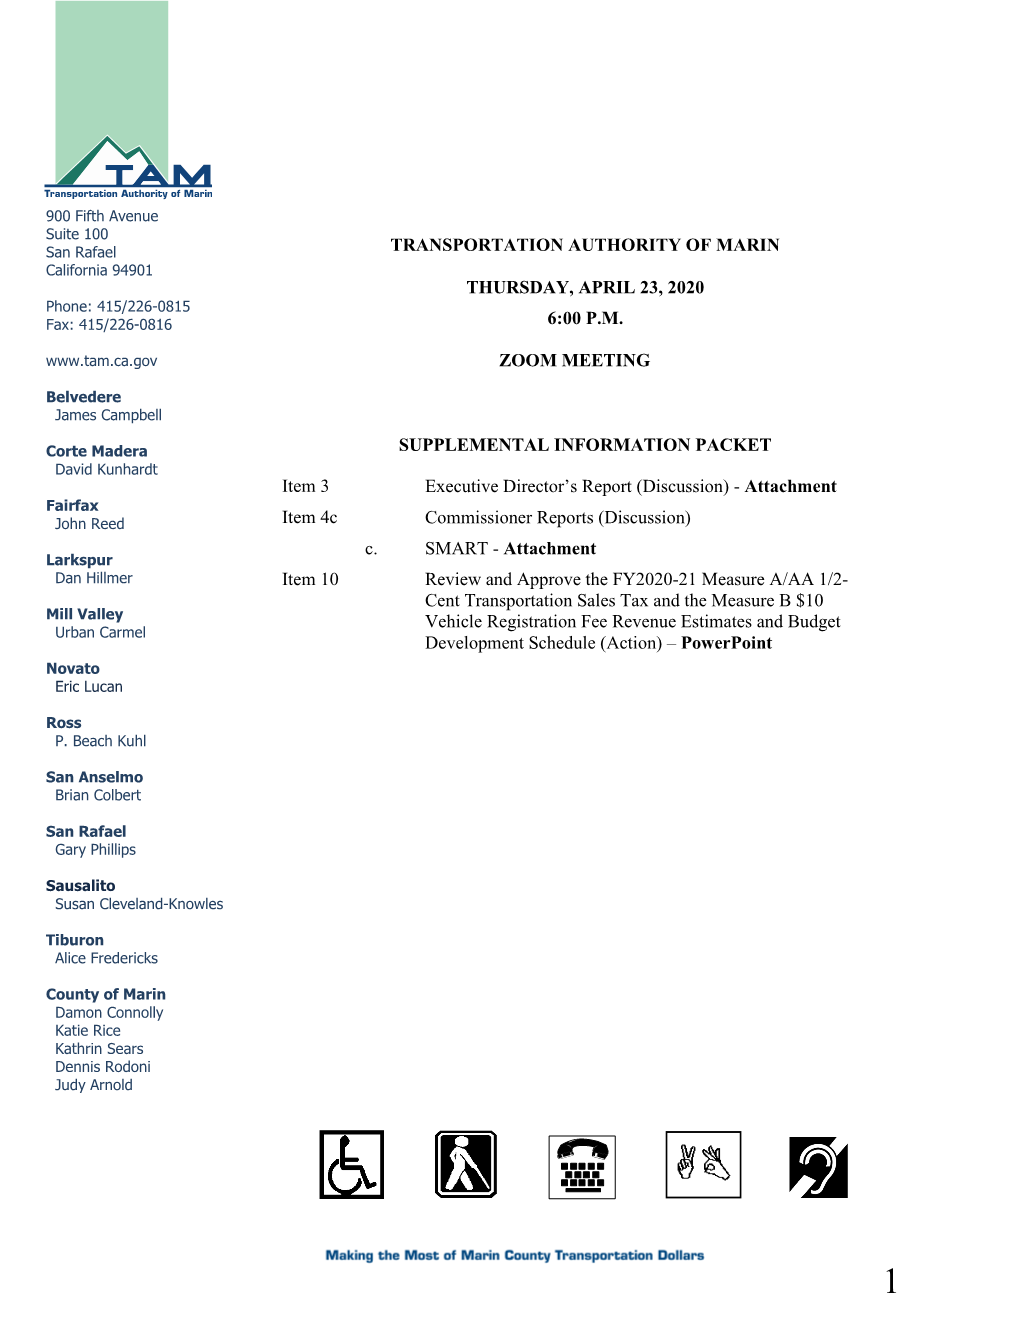 TRANSPORTATION AUTHORITY of MARIN THURSDAY, APRIL 23, 2020 6:00 P.M. ZOOM MEETING SUPPLEMENTAL INFORMATION PACKET Item 3 Execut